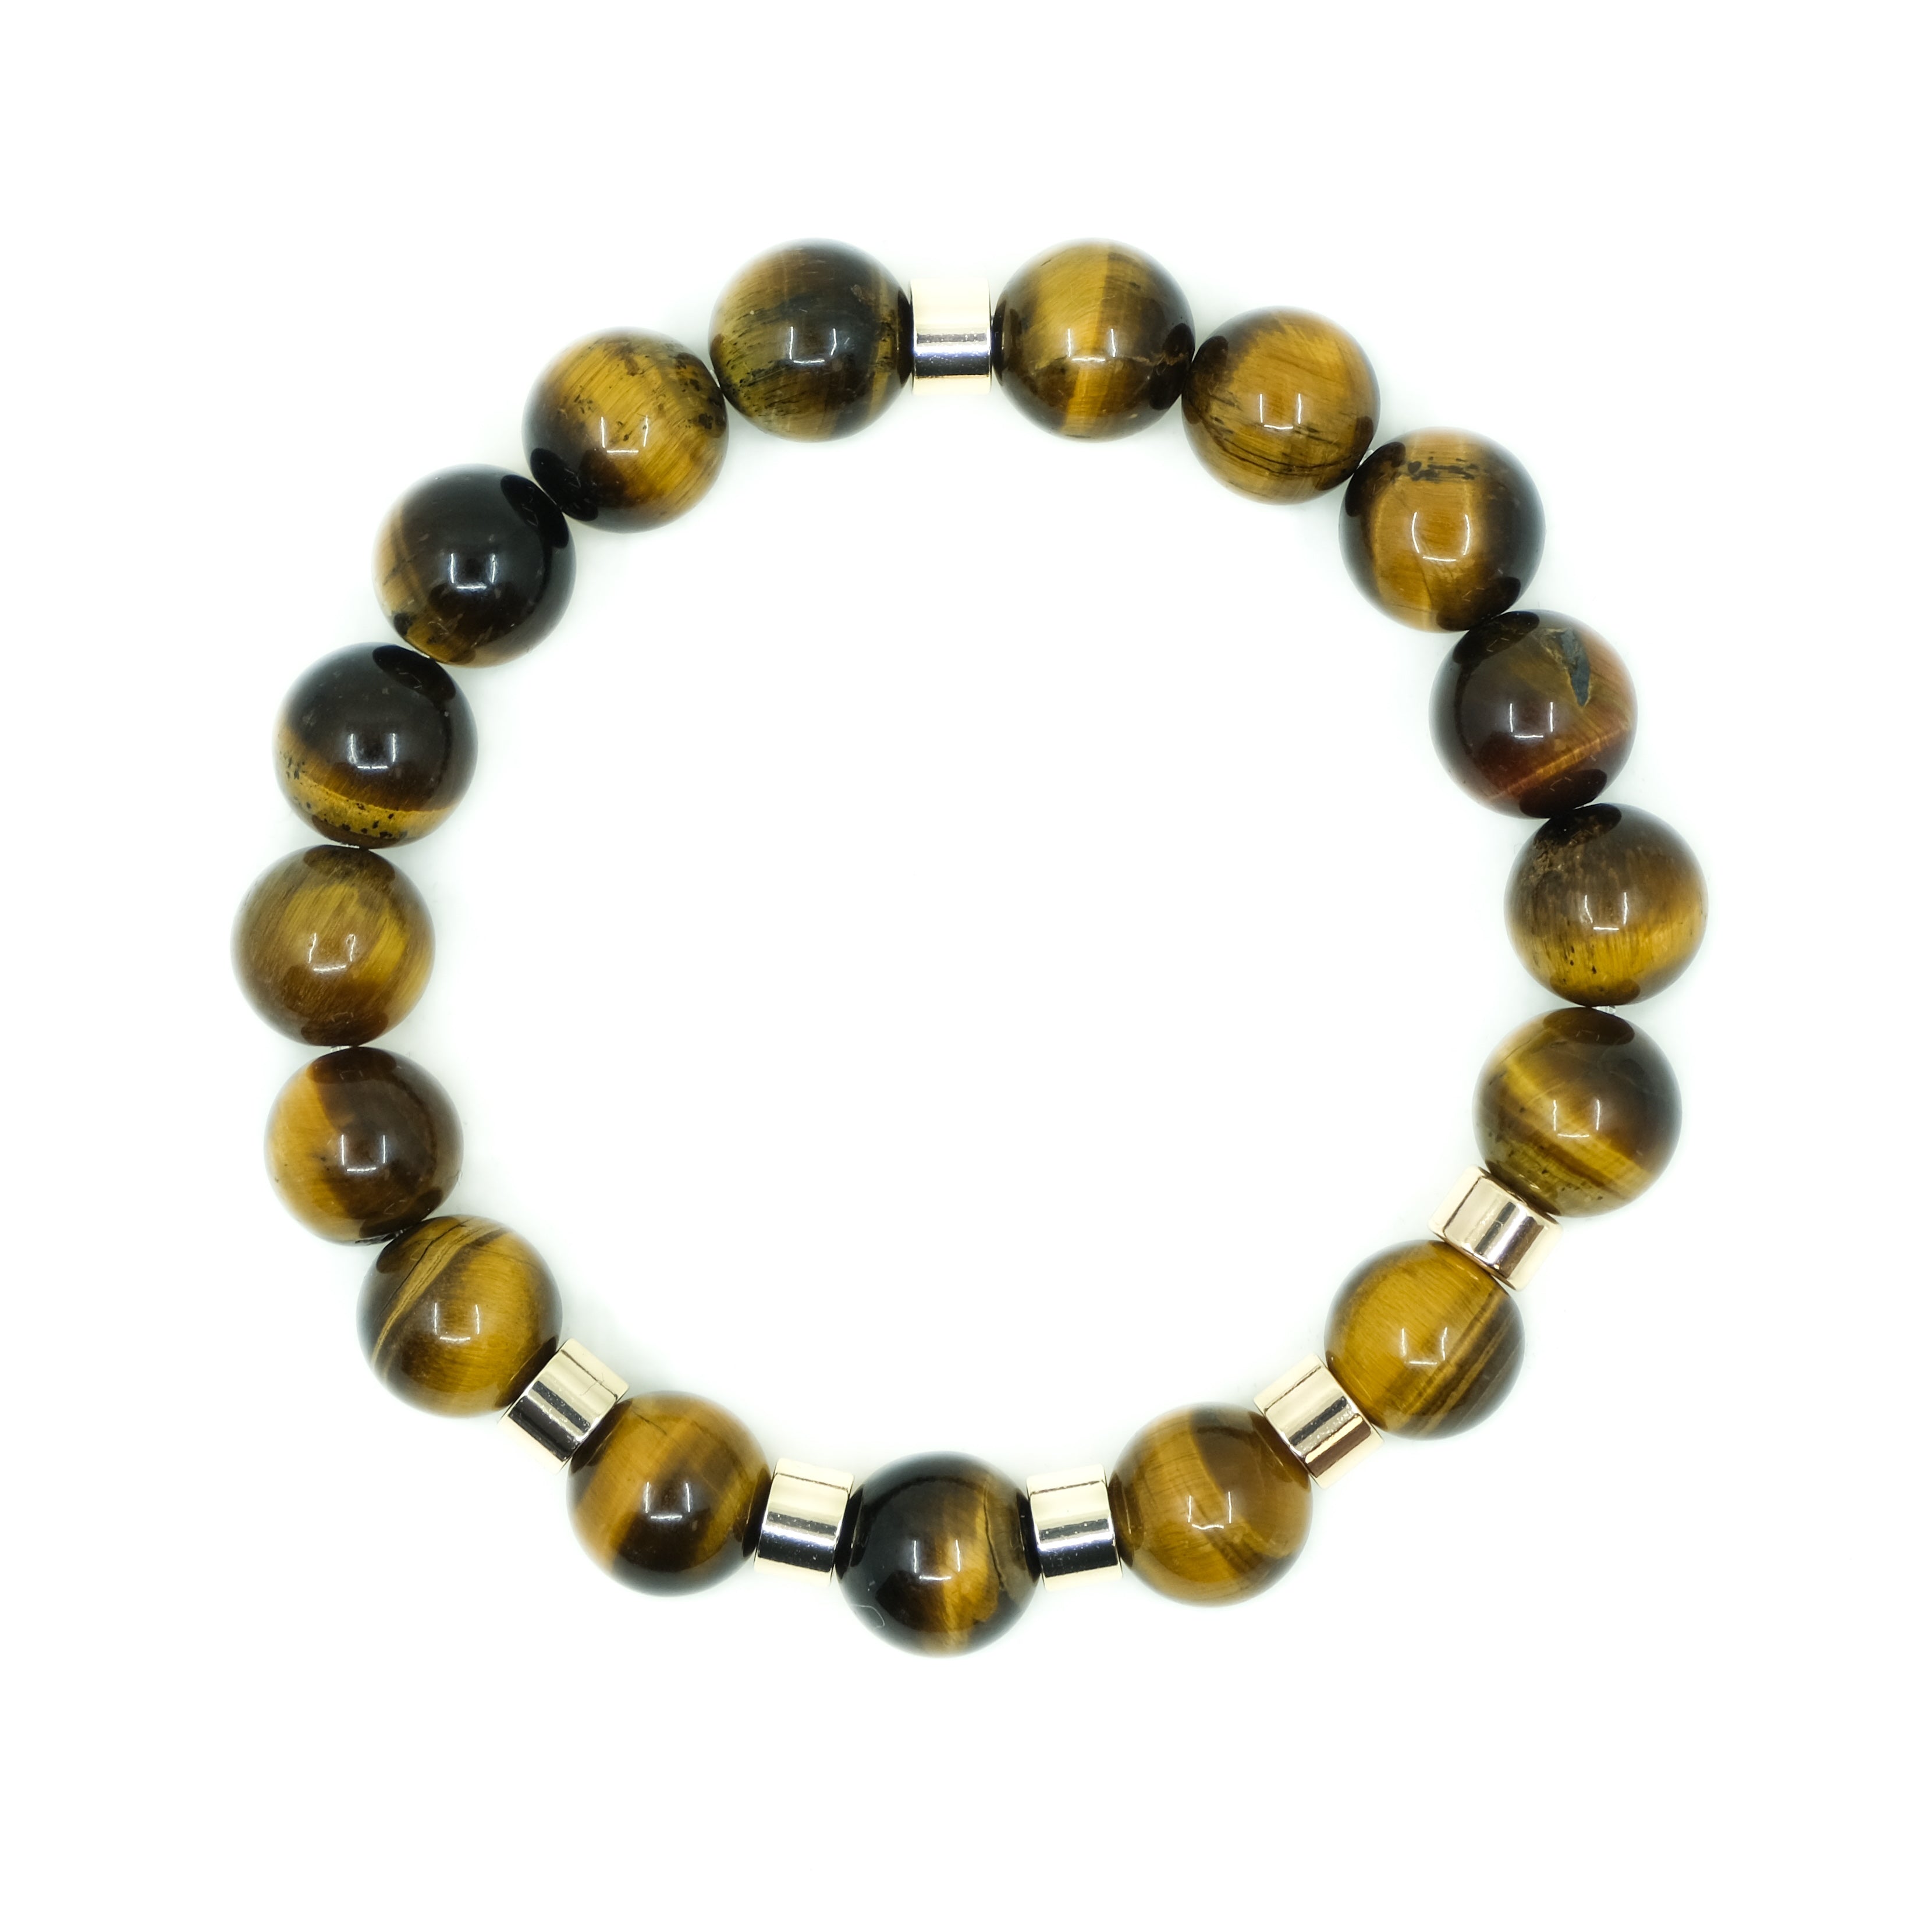 A Tiger Eye gemstone bracelet in 10mm beads with gold accessories from above